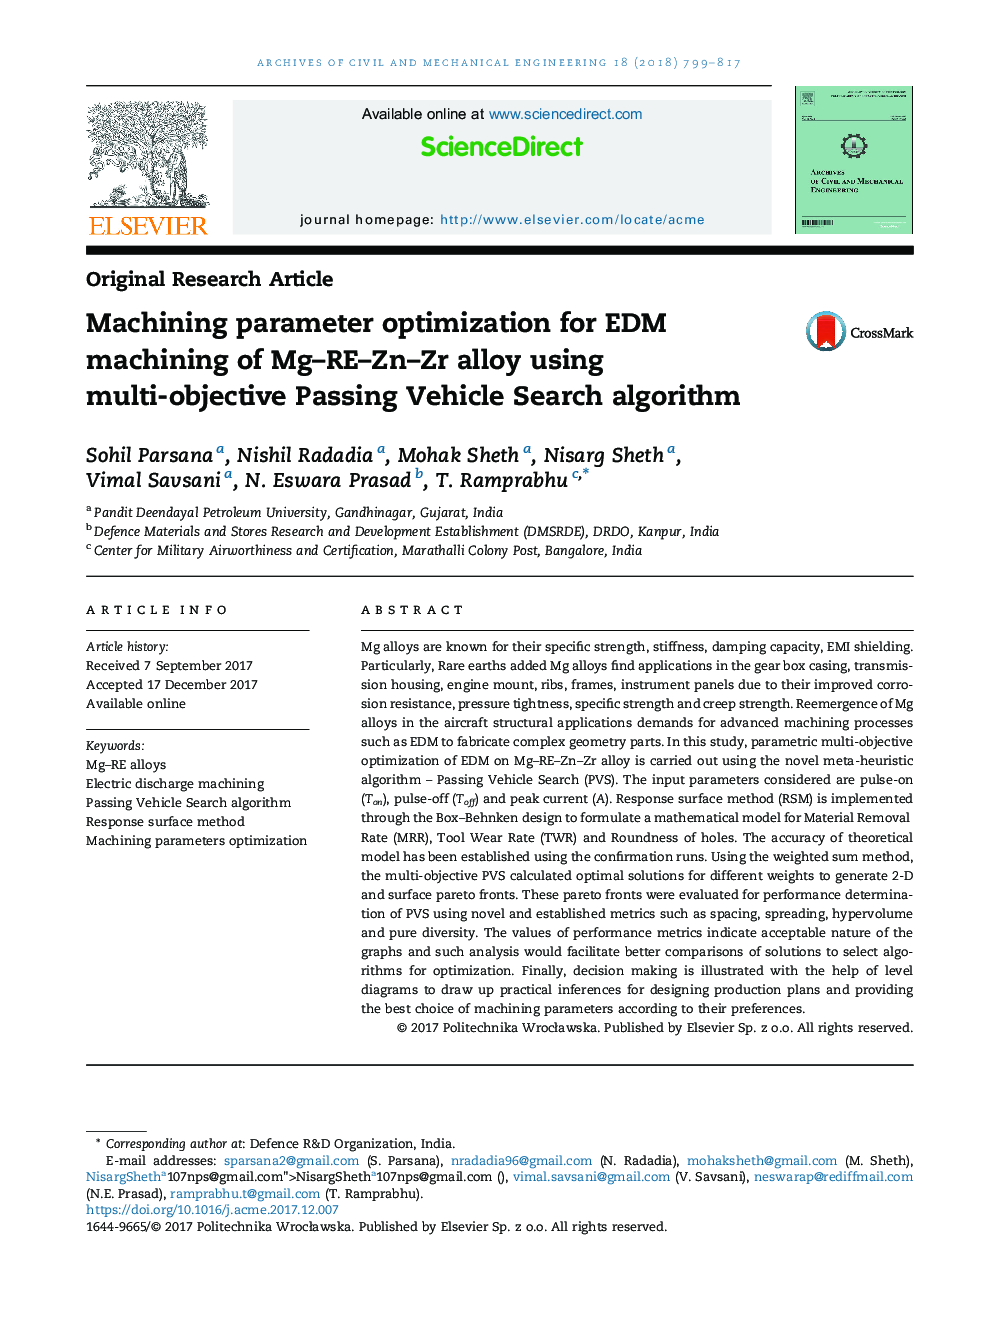 Machining parameter optimization for EDM machining of Mg-RE-Zn-Zr alloy using multi-objective Passing Vehicle Search algorithm